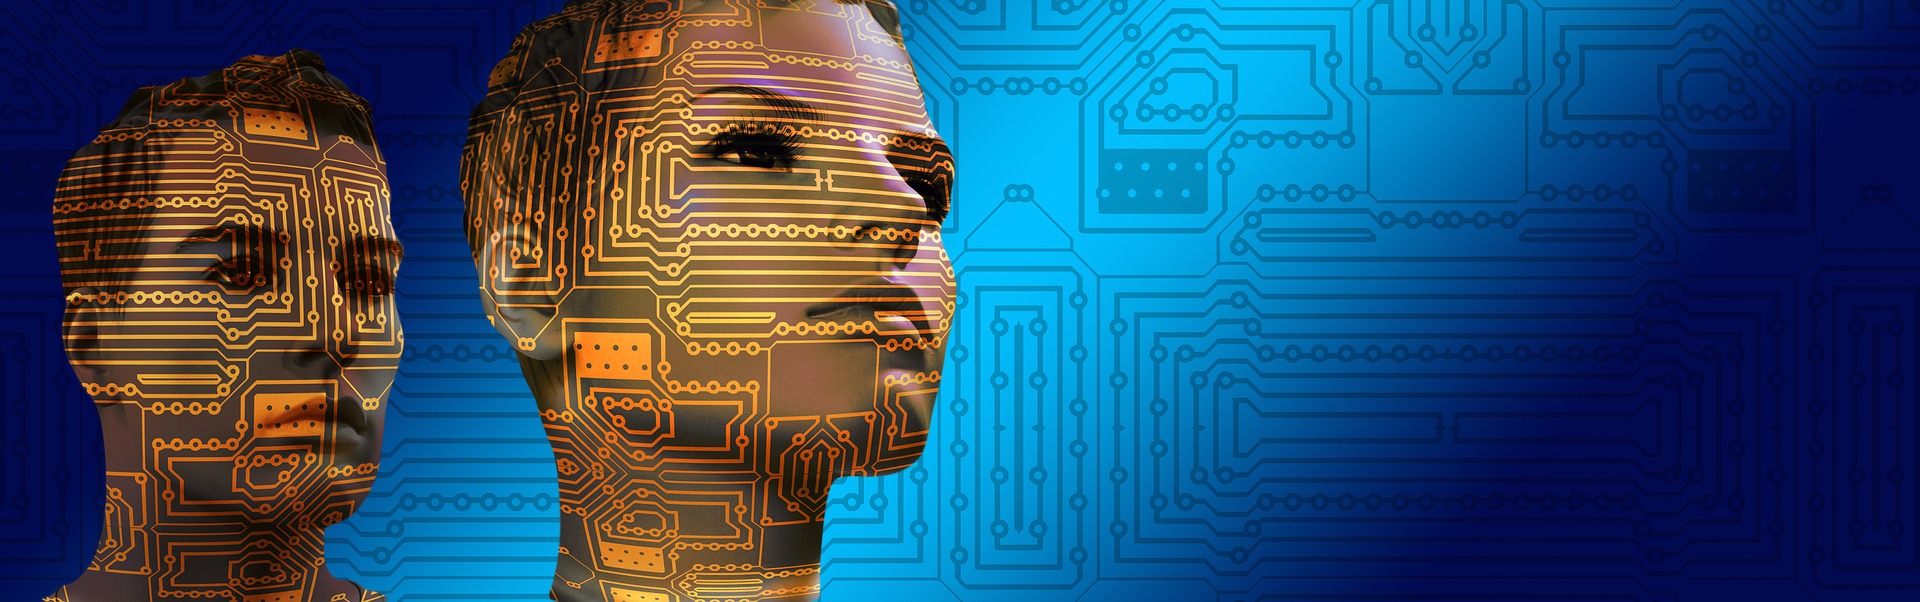 Is Artificial Intelligence Safe?